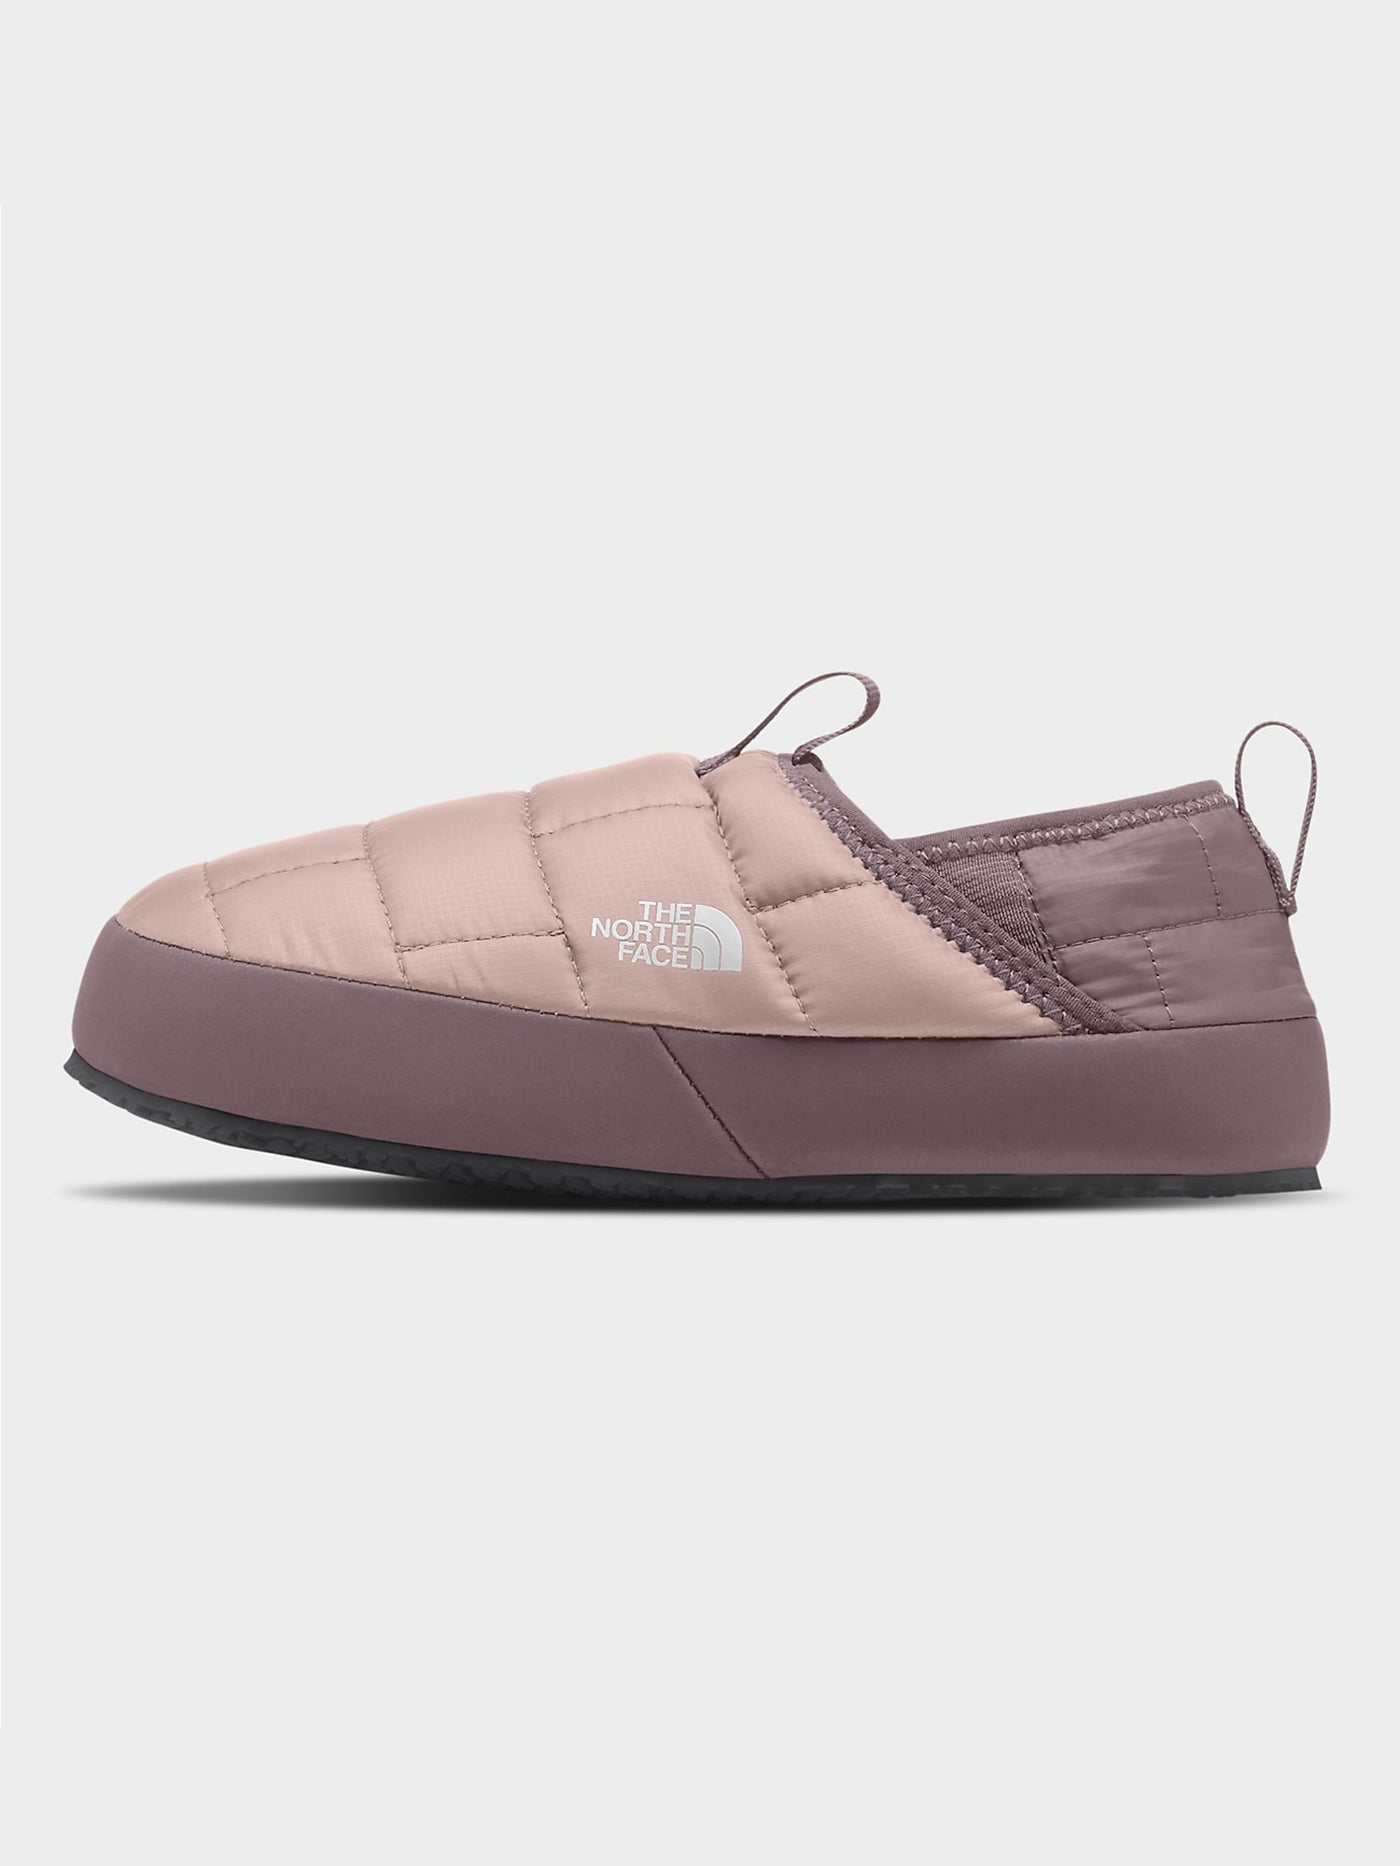 The North Face Thermoball Traction Mule II Pink/Grey Shoes | EMPIRE